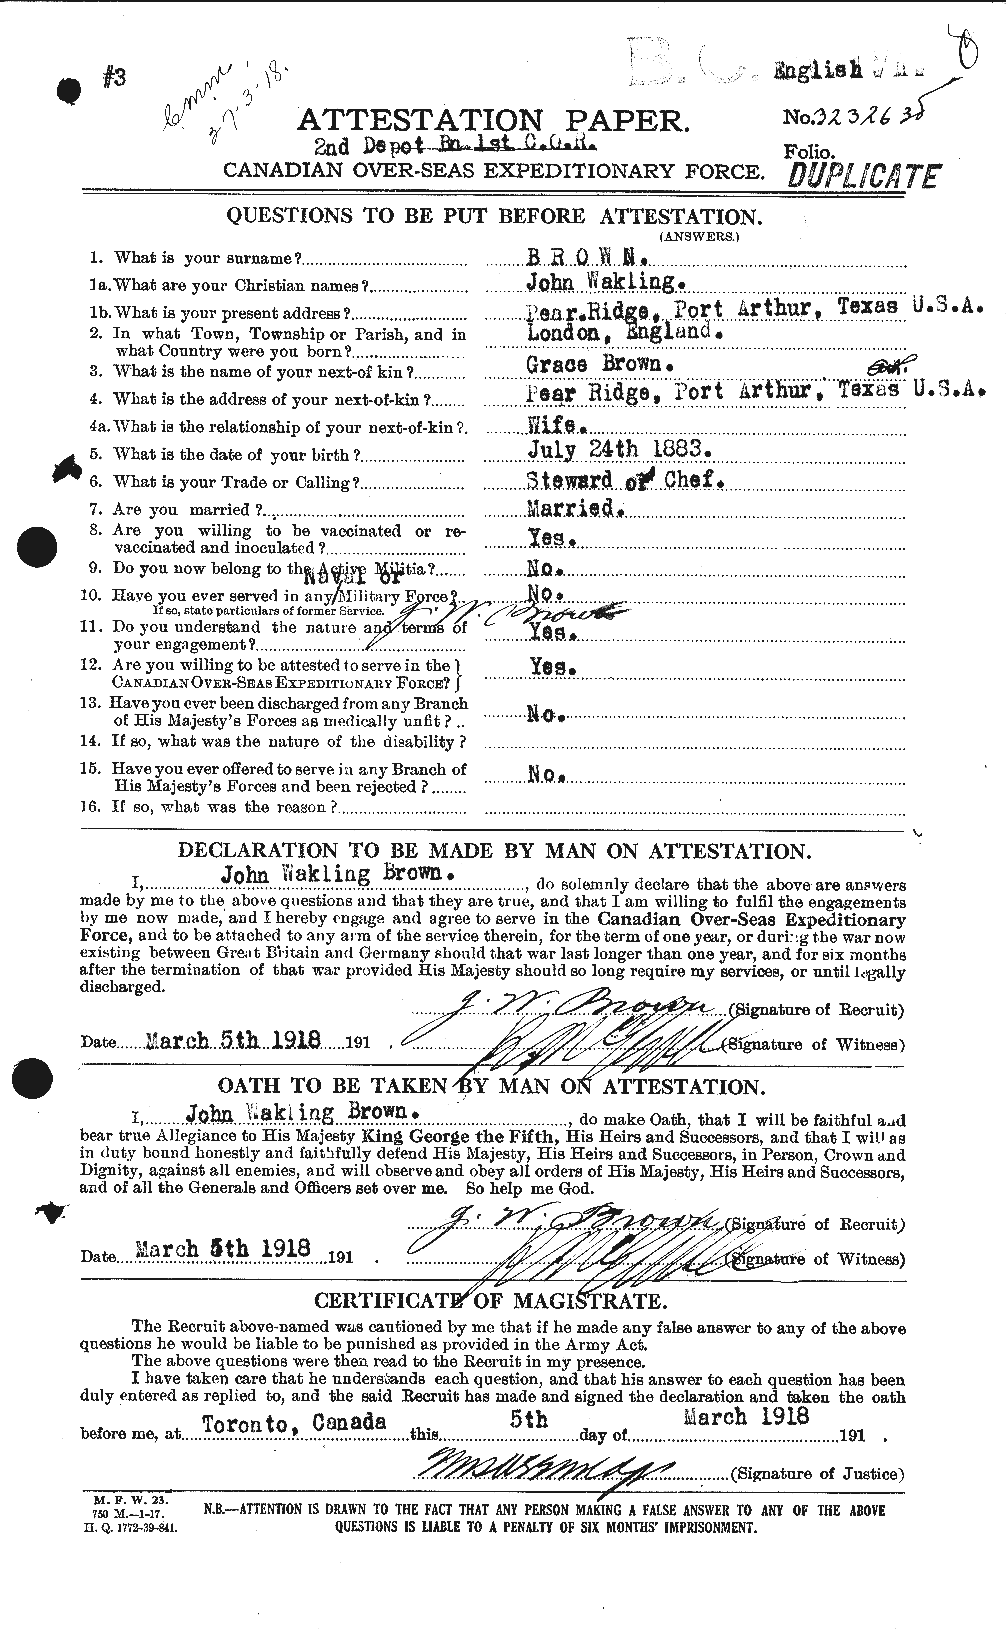 Personnel Records of the First World War - CEF 265893a